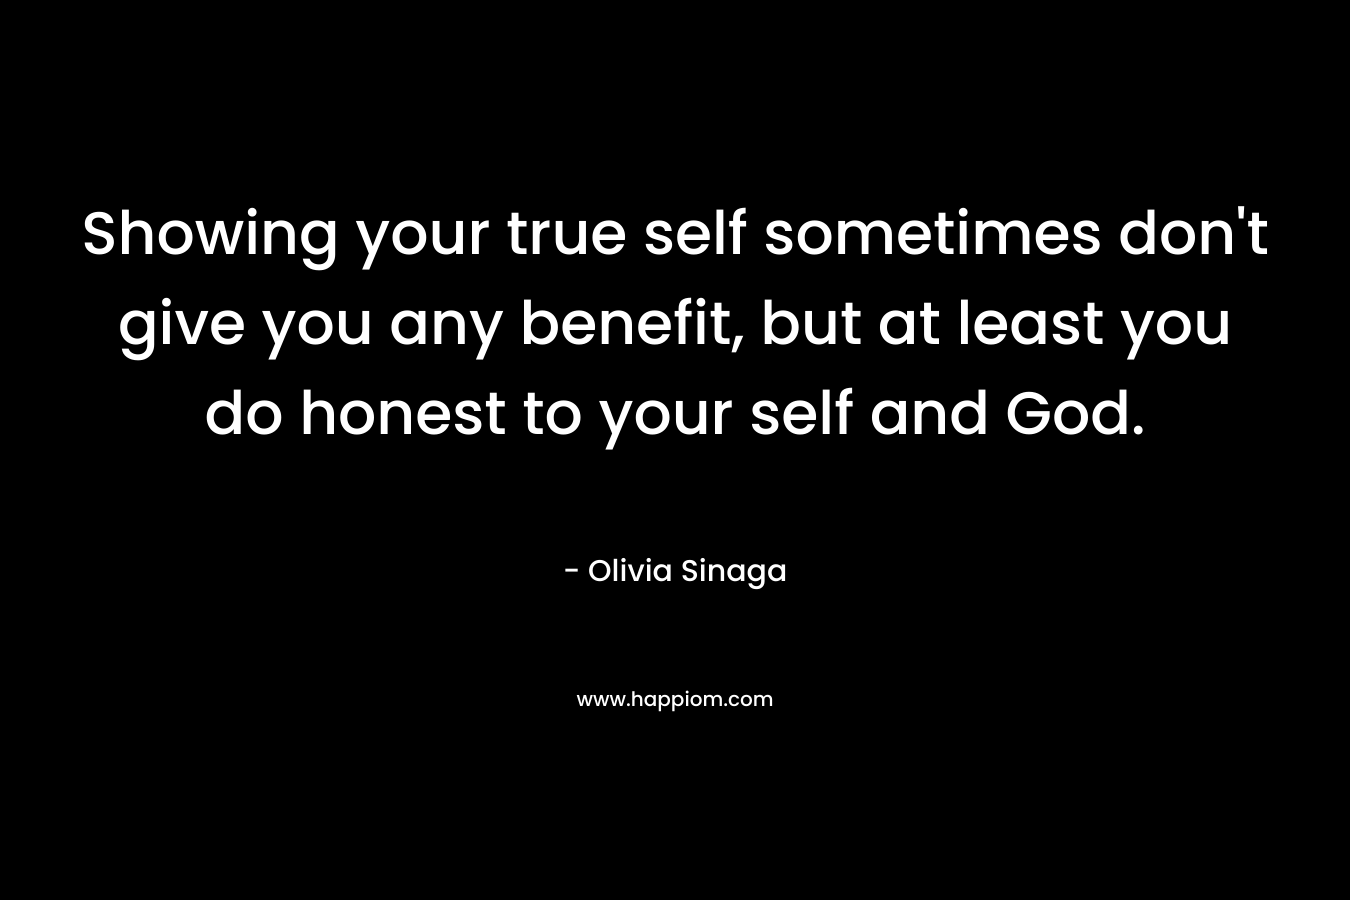 Showing your true self sometimes don't give you any benefit, but at least you do honest to your self and God.